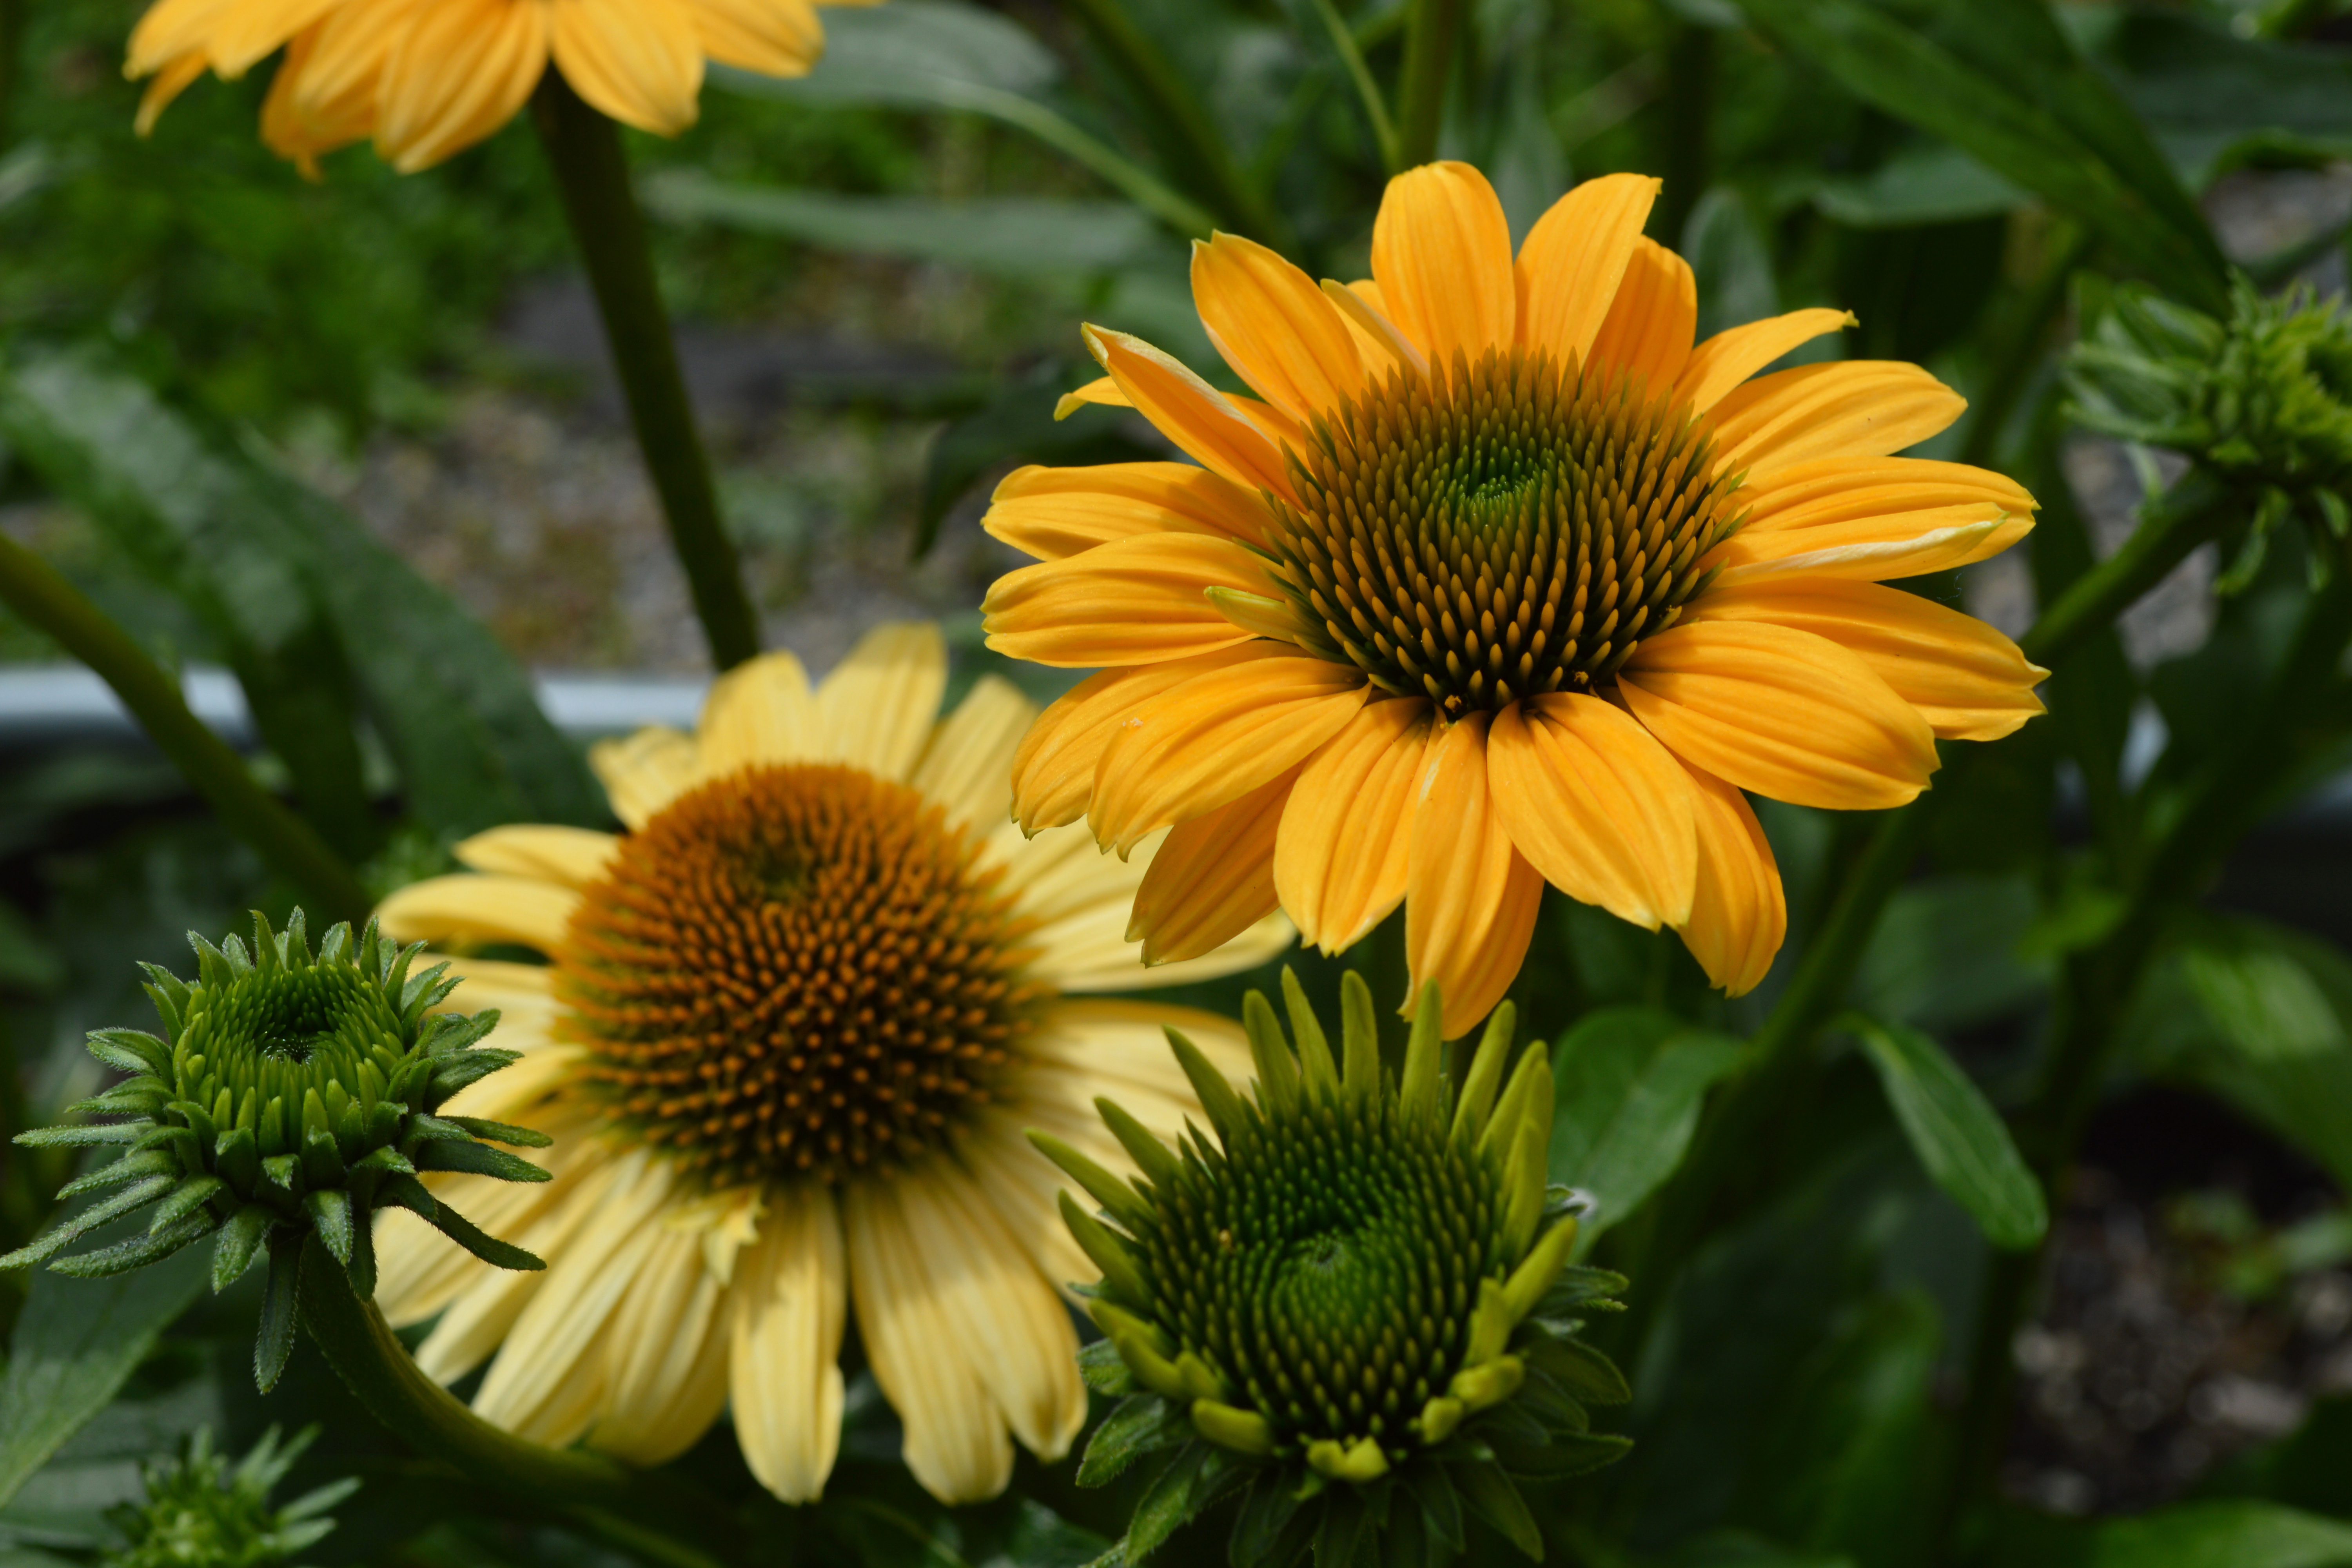 Cone Flower (Echinacea purpurea) brings a pop of yellow with large, sunny golden blooms.